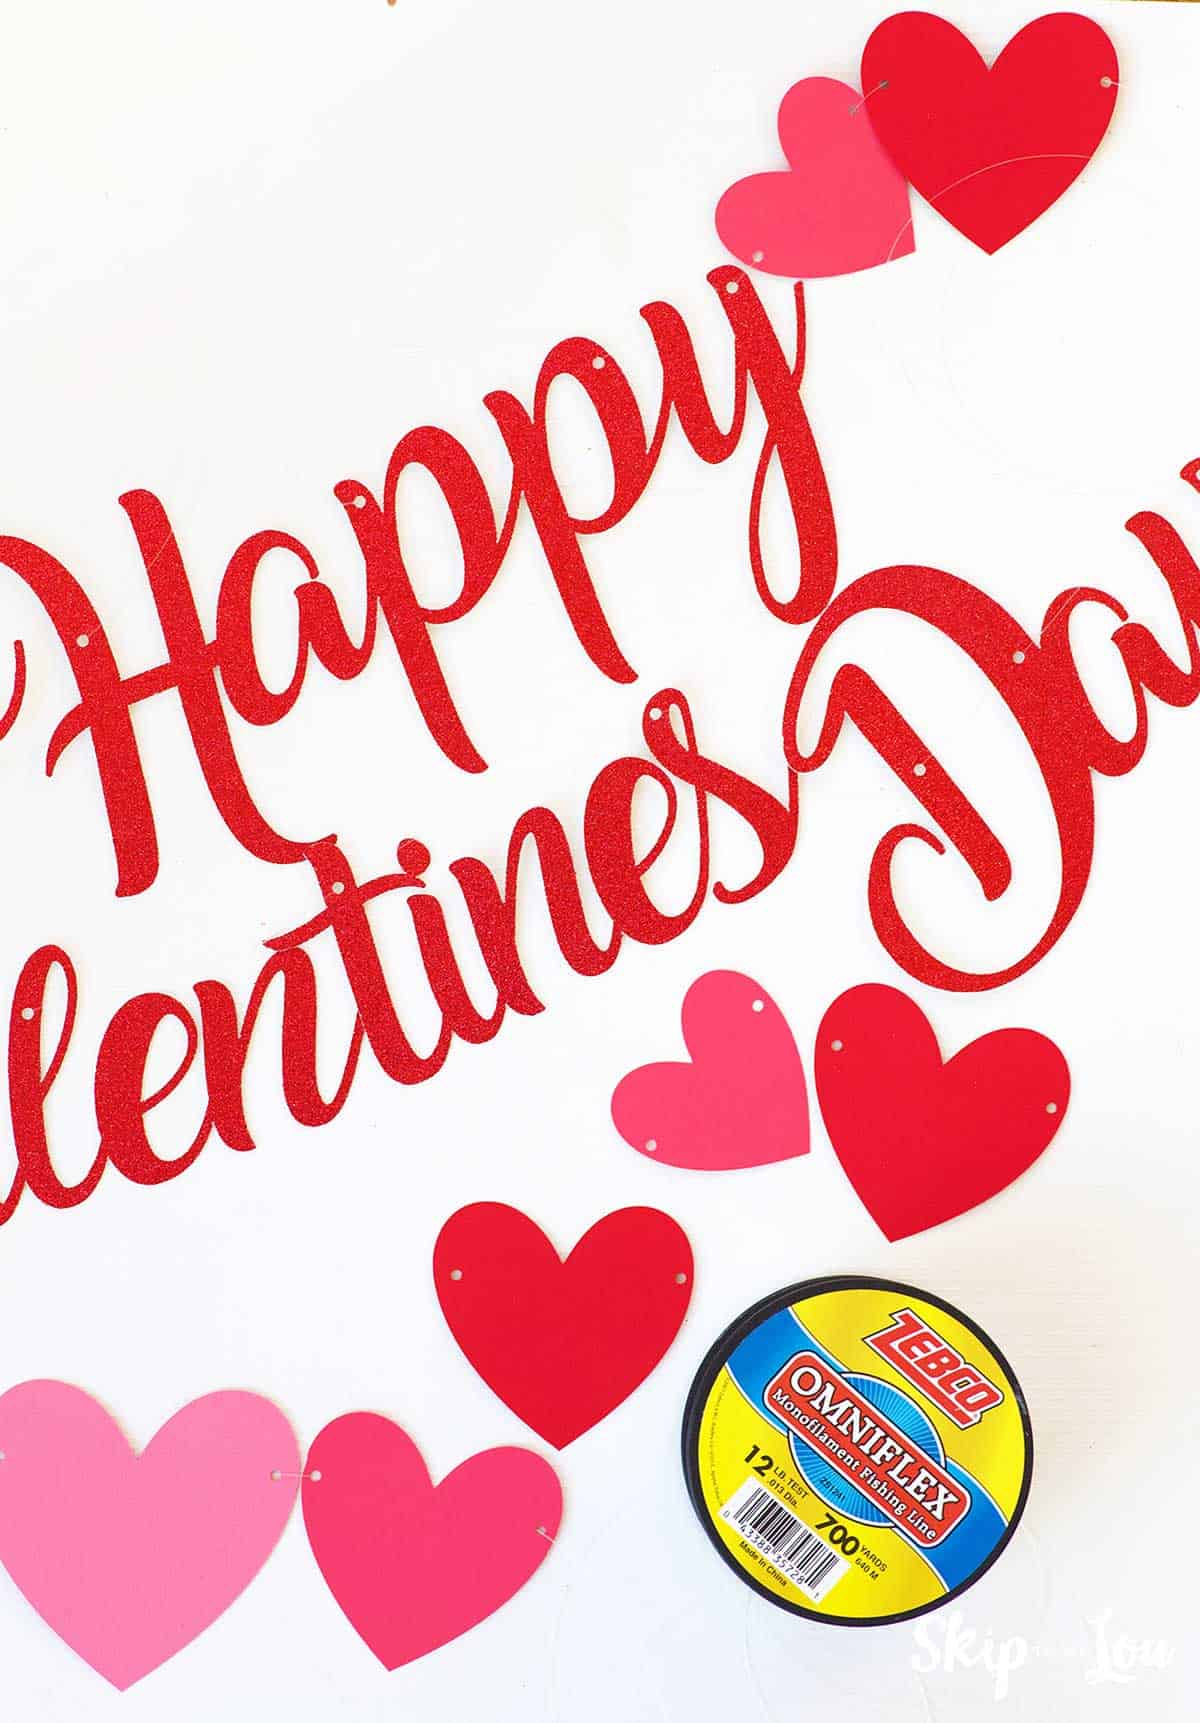 Details about  / Happy Valentines Day Banner Valentines Day Party Supplies Favors USA Seller